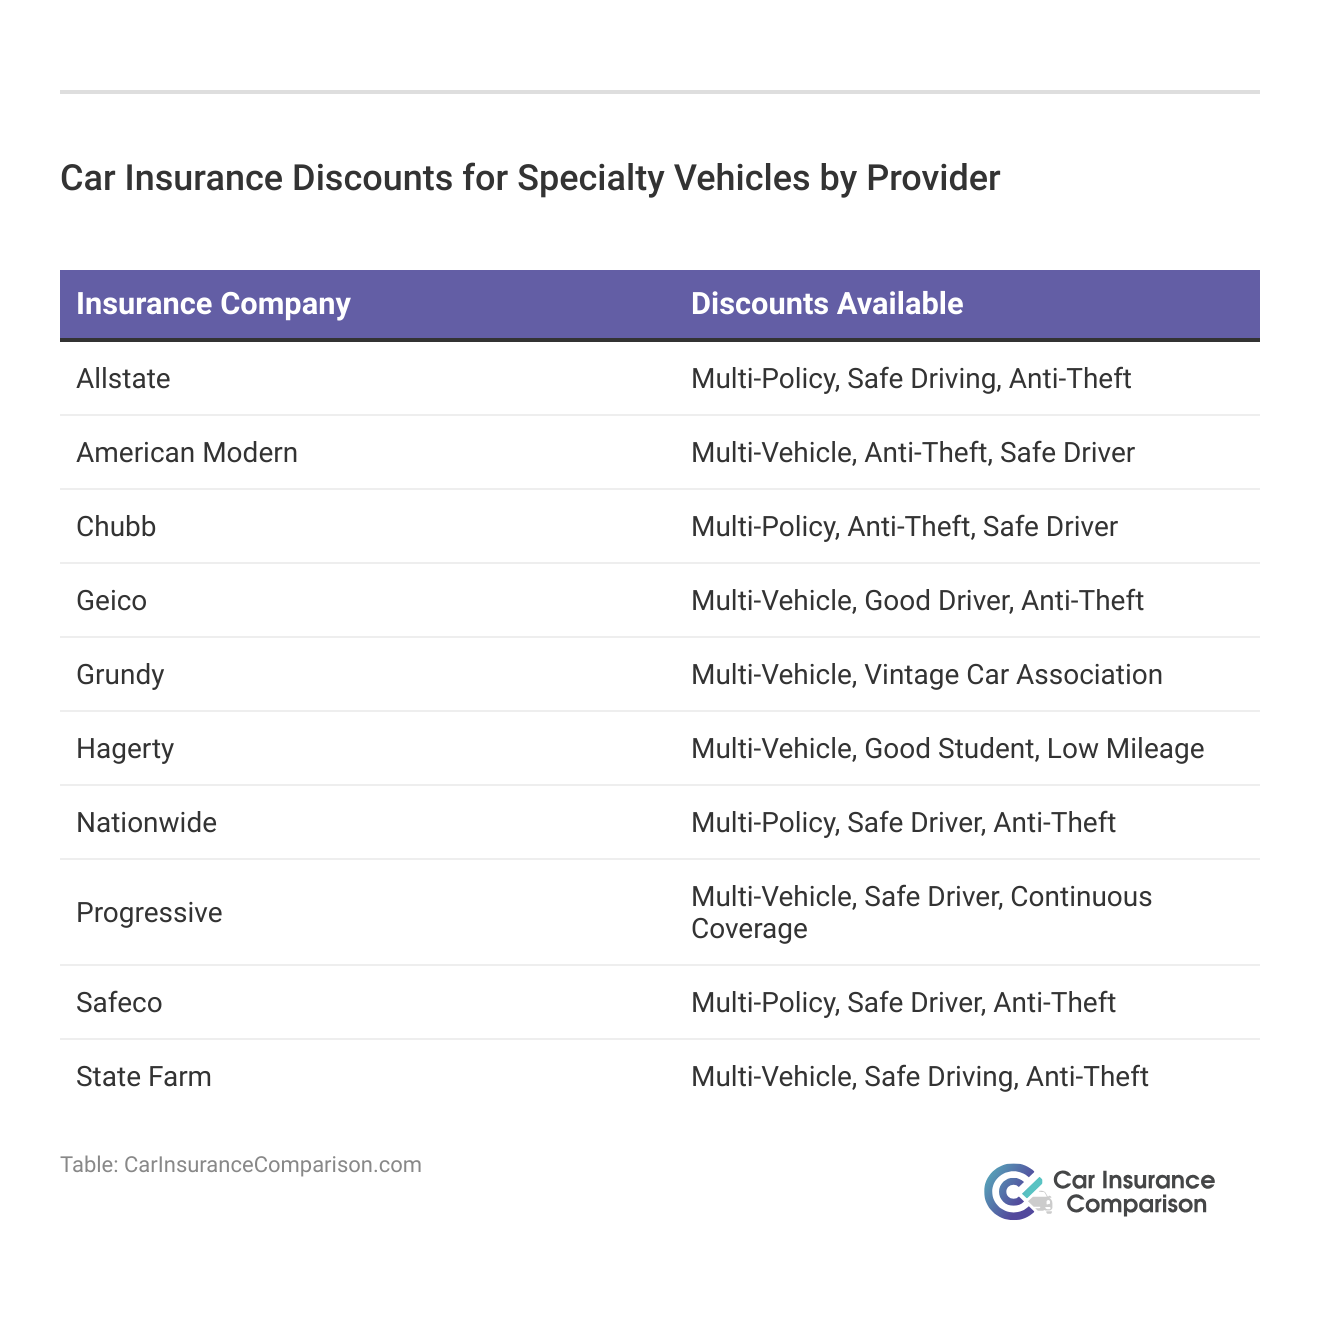 <h3>Car Insurance Discounts for Specialty Vehicles by Provider</h3>